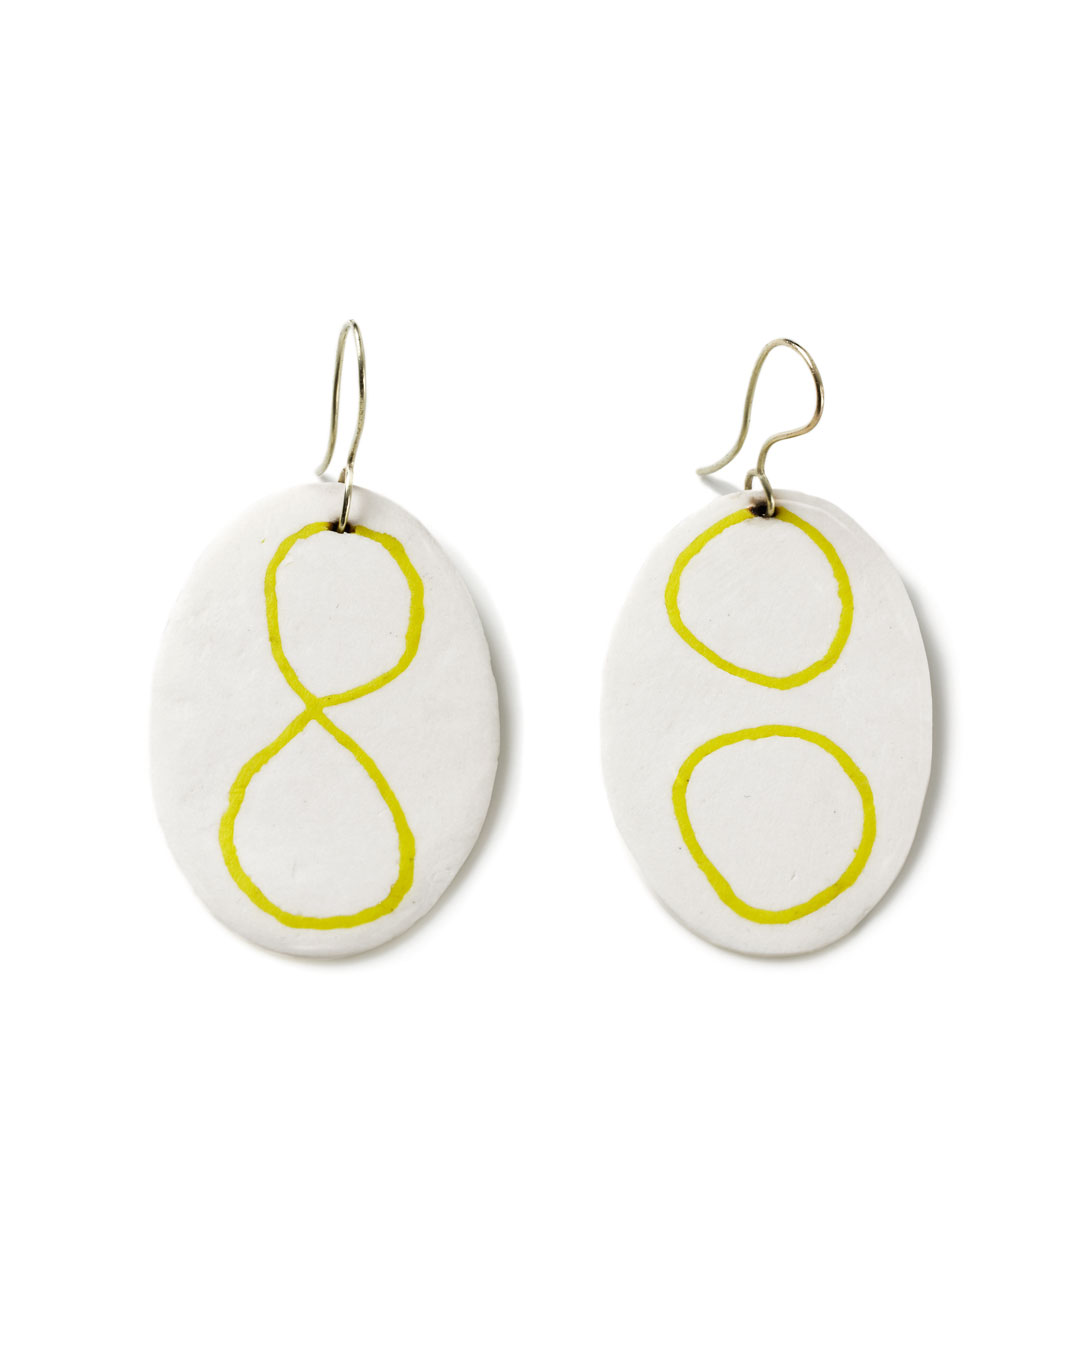 Julie Mollenhauer, untitled, 2018, earrings; porcelain, Fimo, silver, 14ct gold, 45 x 30 x 5 mm, €550